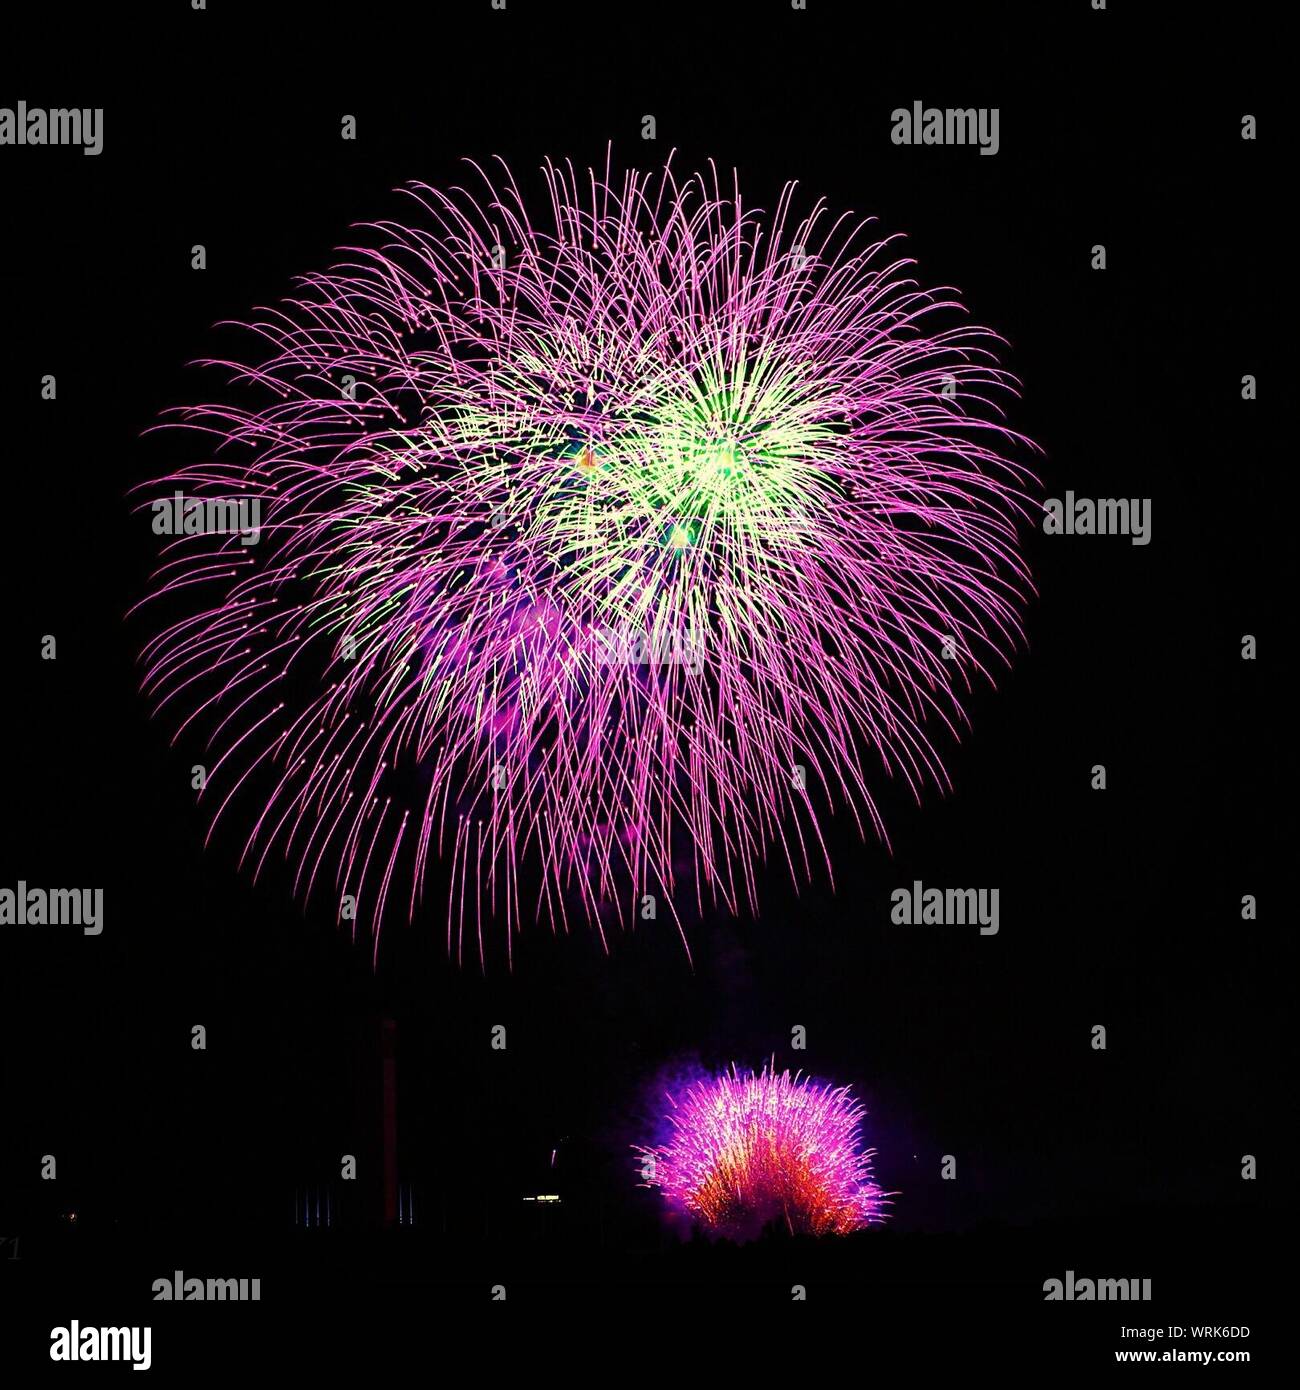 Colorful Fireworks Display In Sky At Night Stock Photo